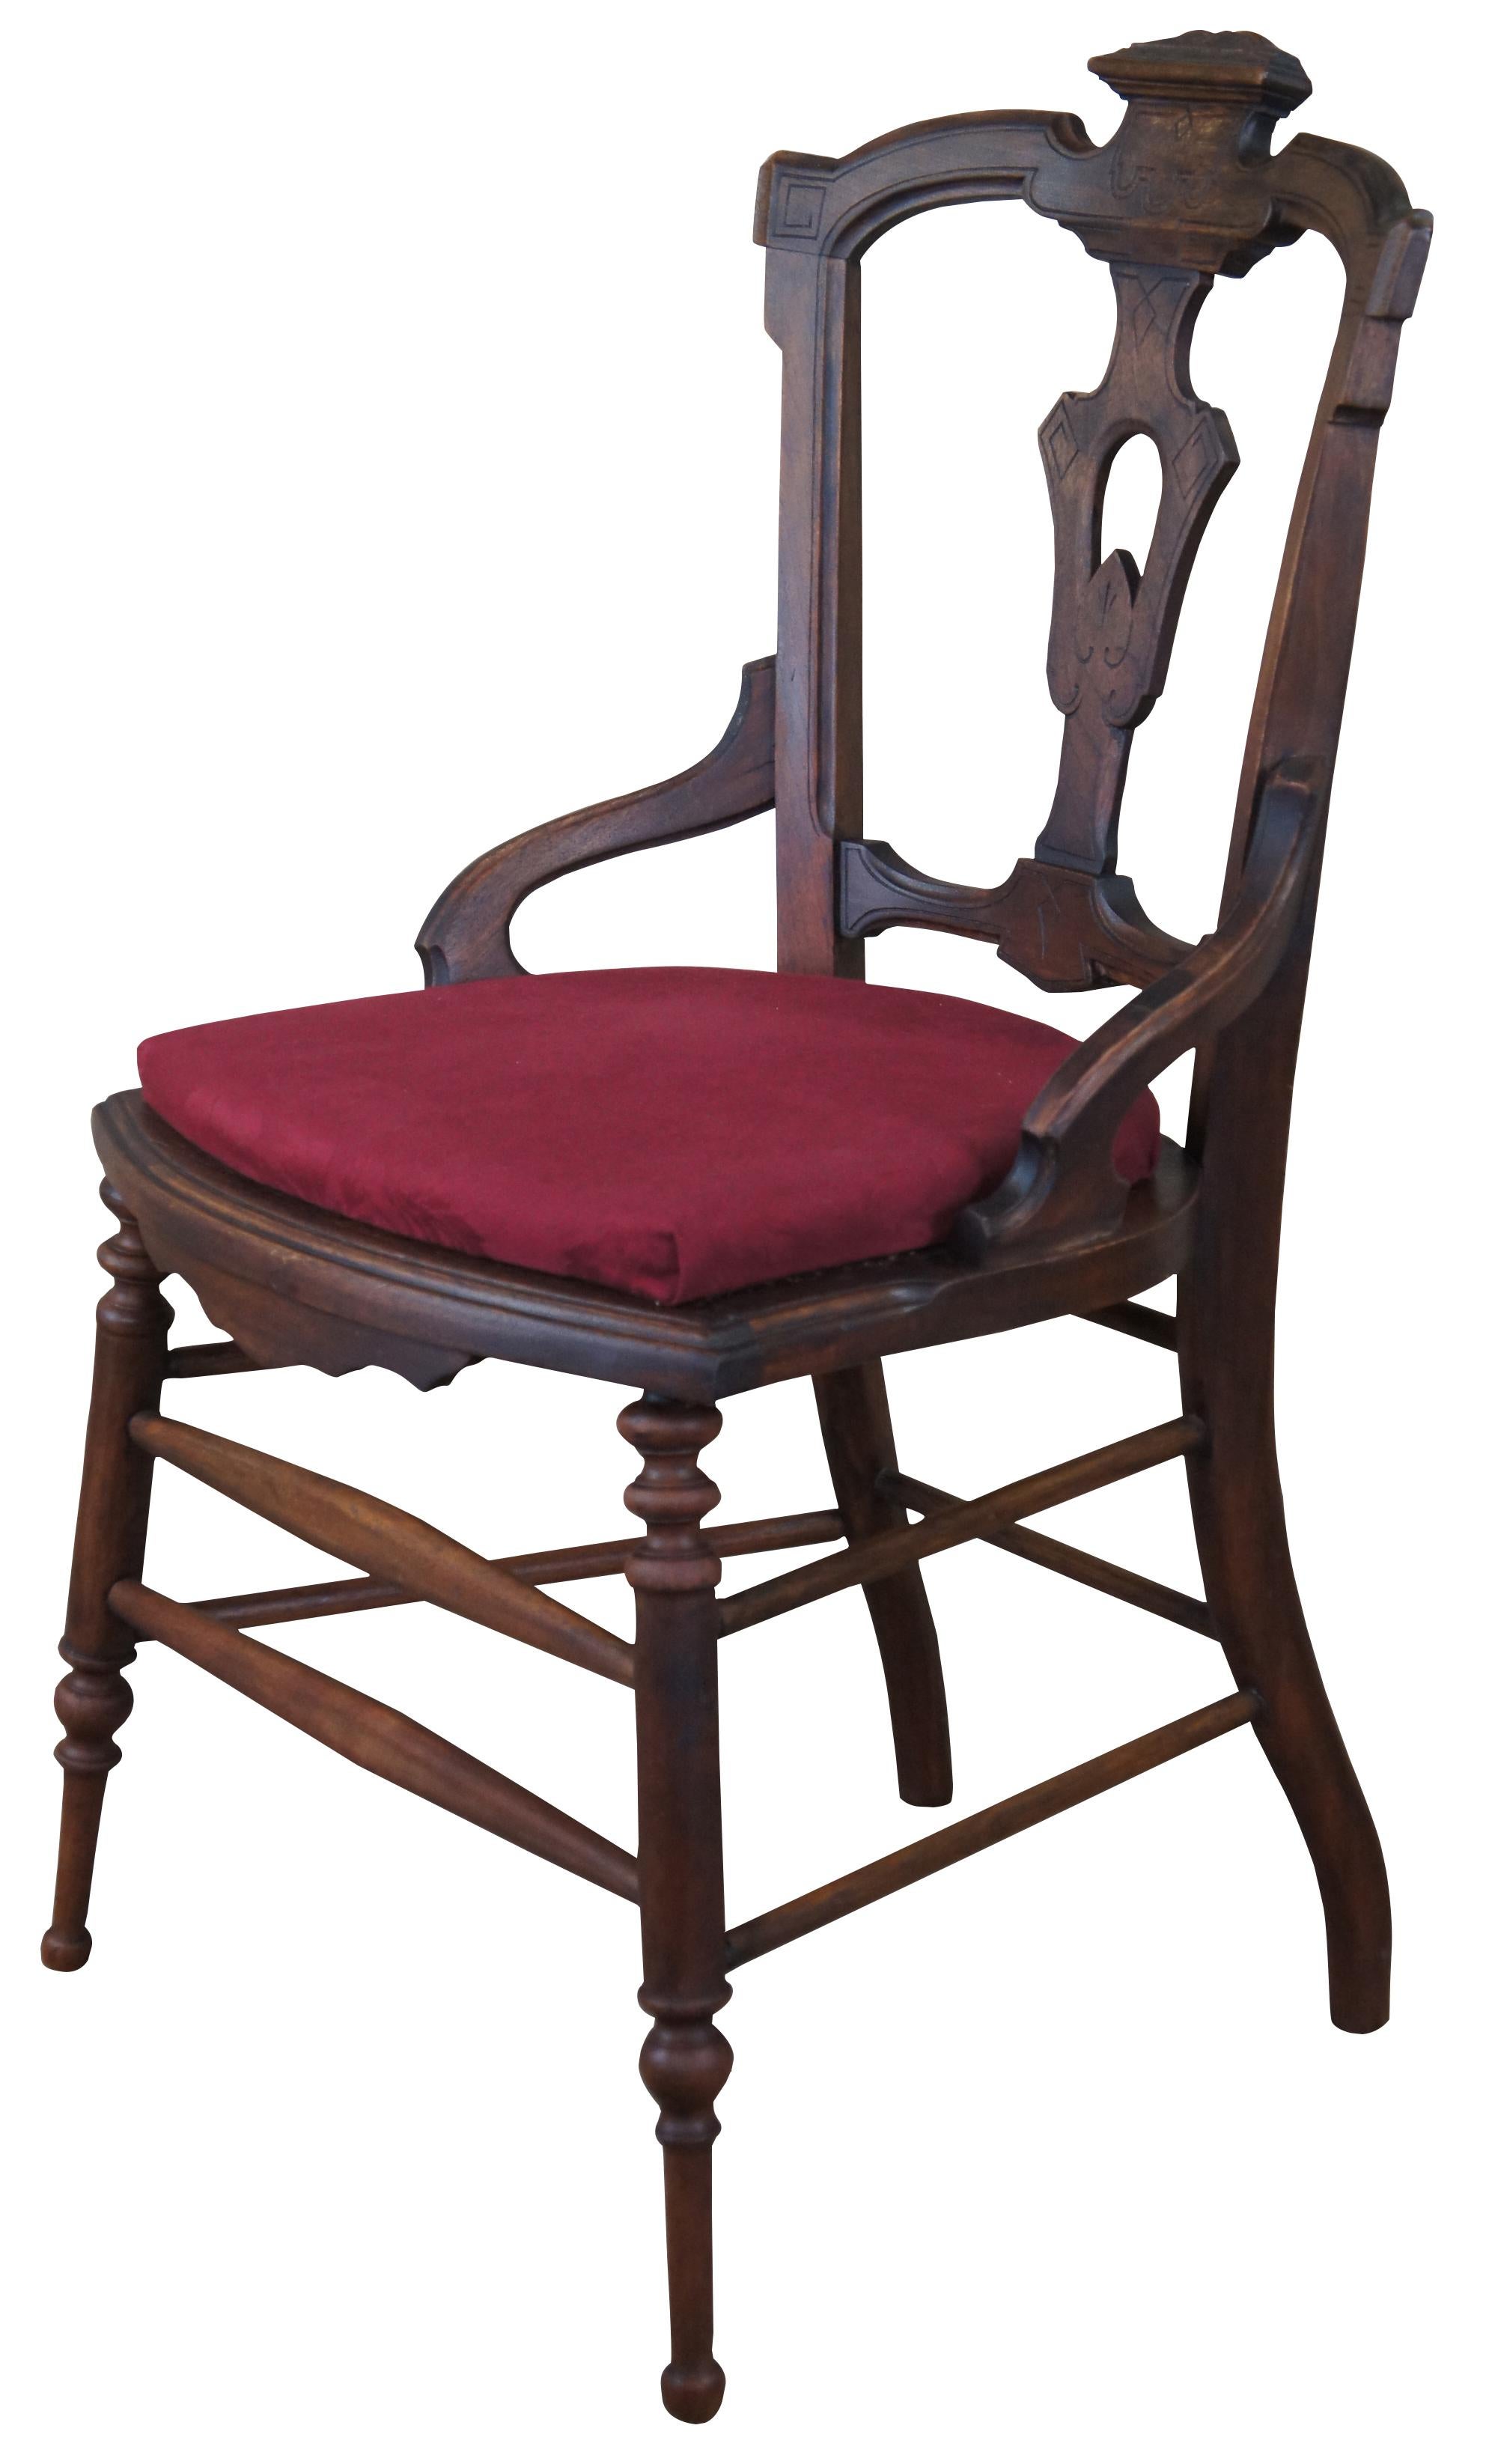 Antique Victorian Eastlake dining parlor chair. Made of walnut featuring ornate design with carved accents and turned legs.
 